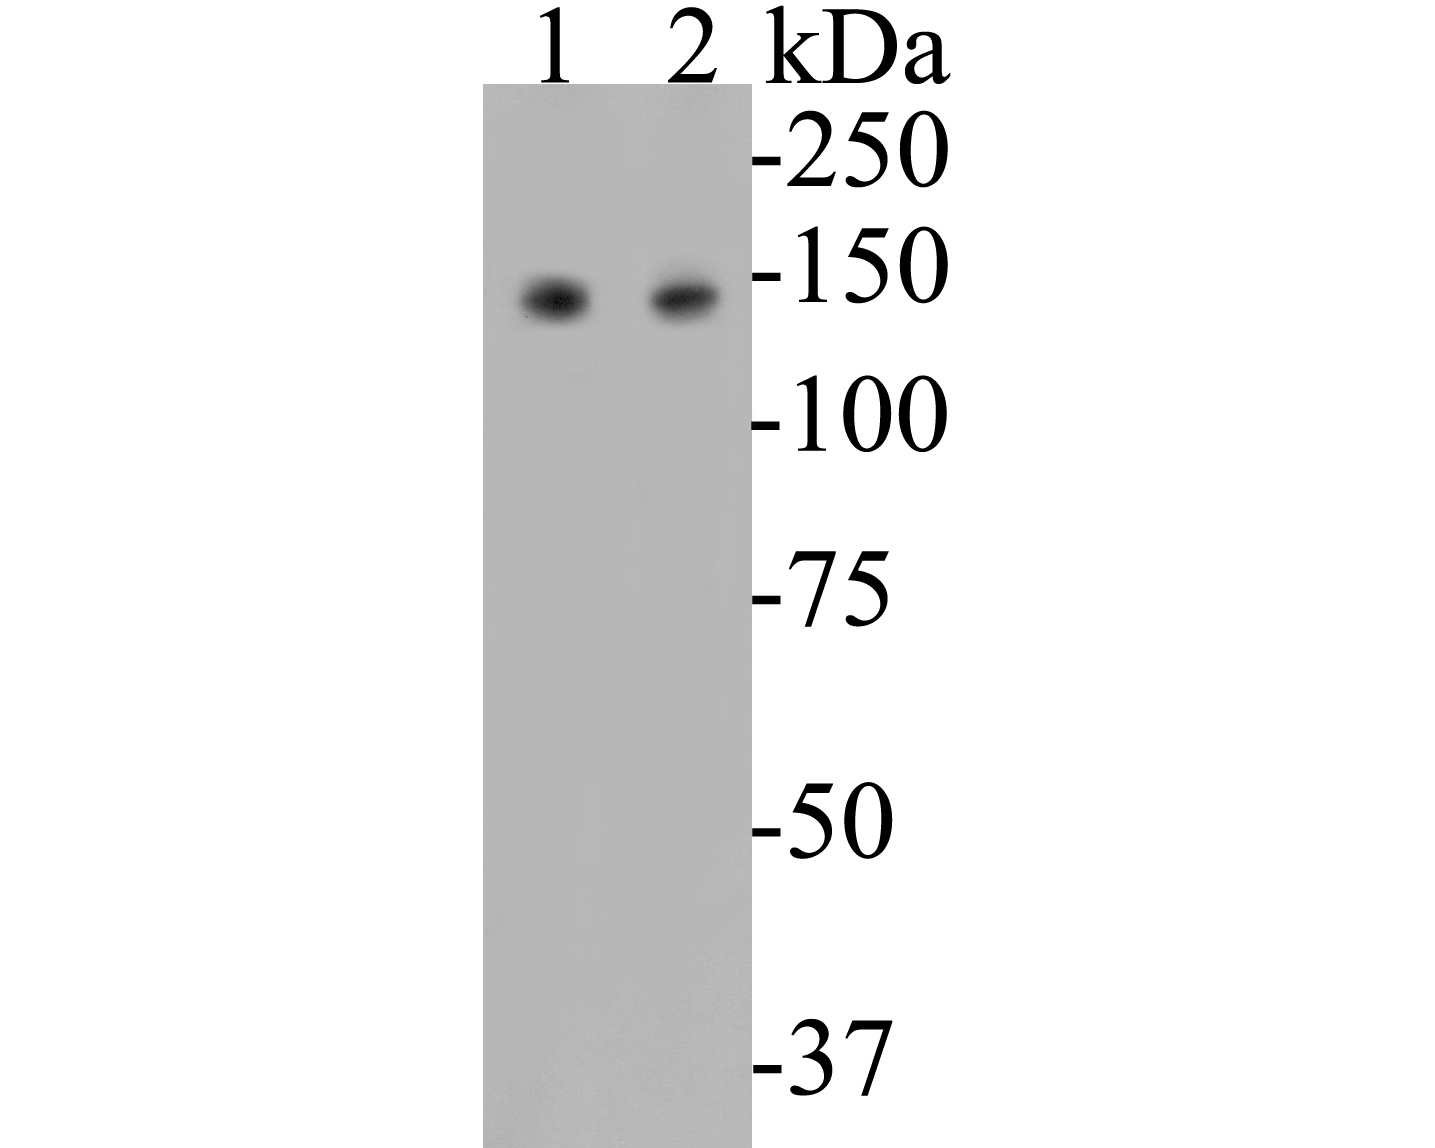 Western blot analysis of USP28 on different lysates. Proteins were transferred to a PVDF membrane and blocked with 5% BSA in PBS for 1 hour at room temperature. The primary antibody (EM1901-47, 1/500) was used in 5% BSA at room temperature for 2 hours. Goat Anti-Mouse IgG - HRP Secondary Antibody (HA1006) at 1:5,000 dilution was used for 1 hour at room temperature. Positive control: <br />
Lane 1: K562 cell lysate <br />
Lane 2: A549 cell lysate